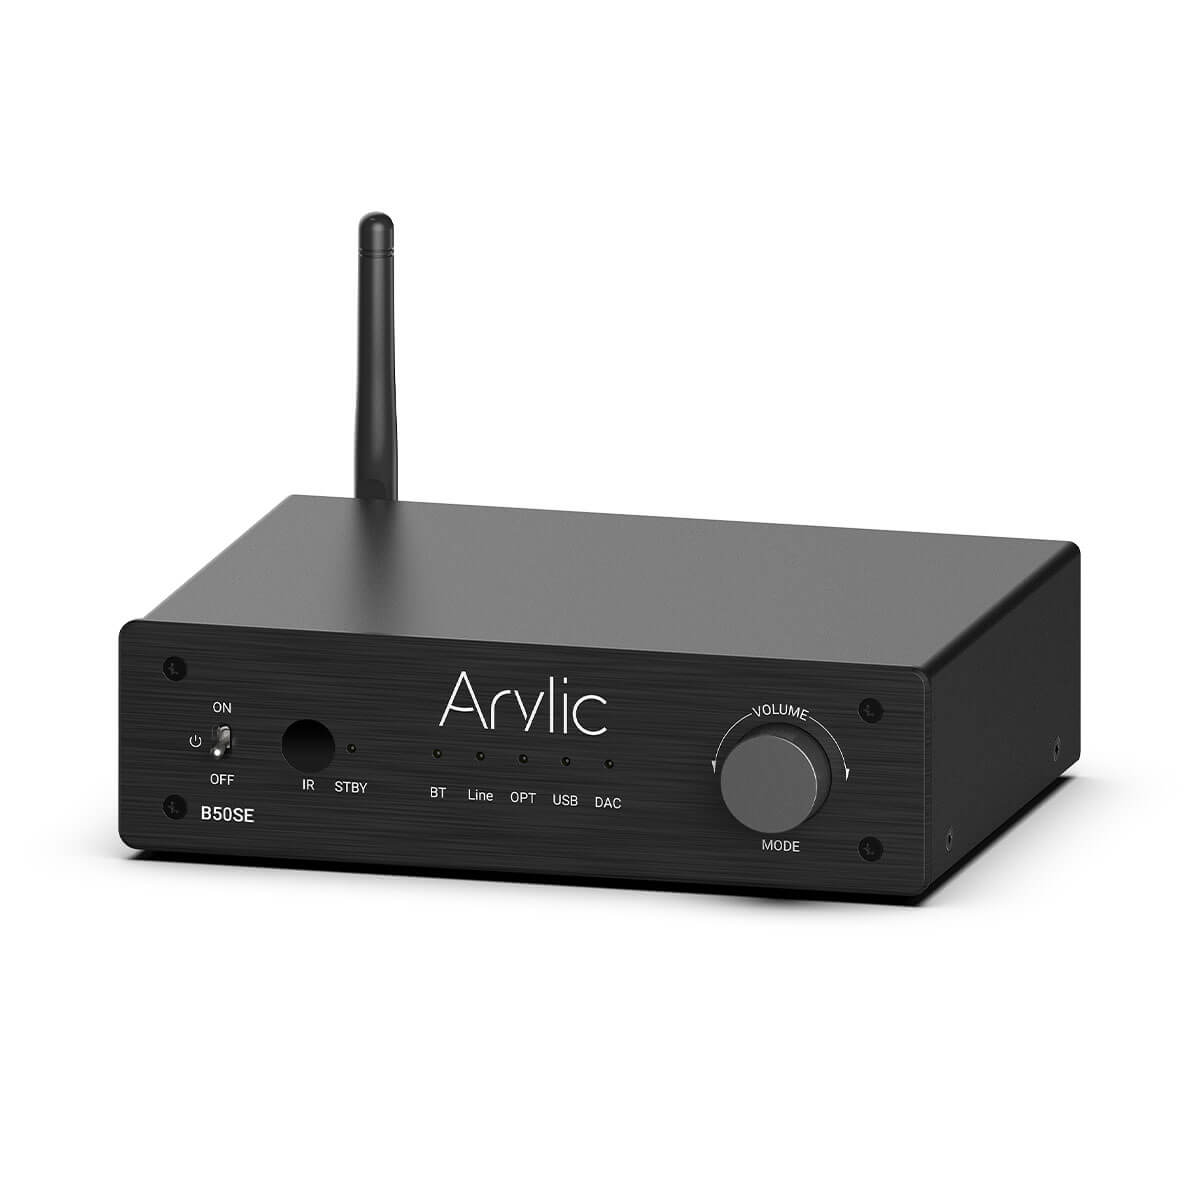 Arylic® Bluetooth Stereo Amplifier With Transmitter